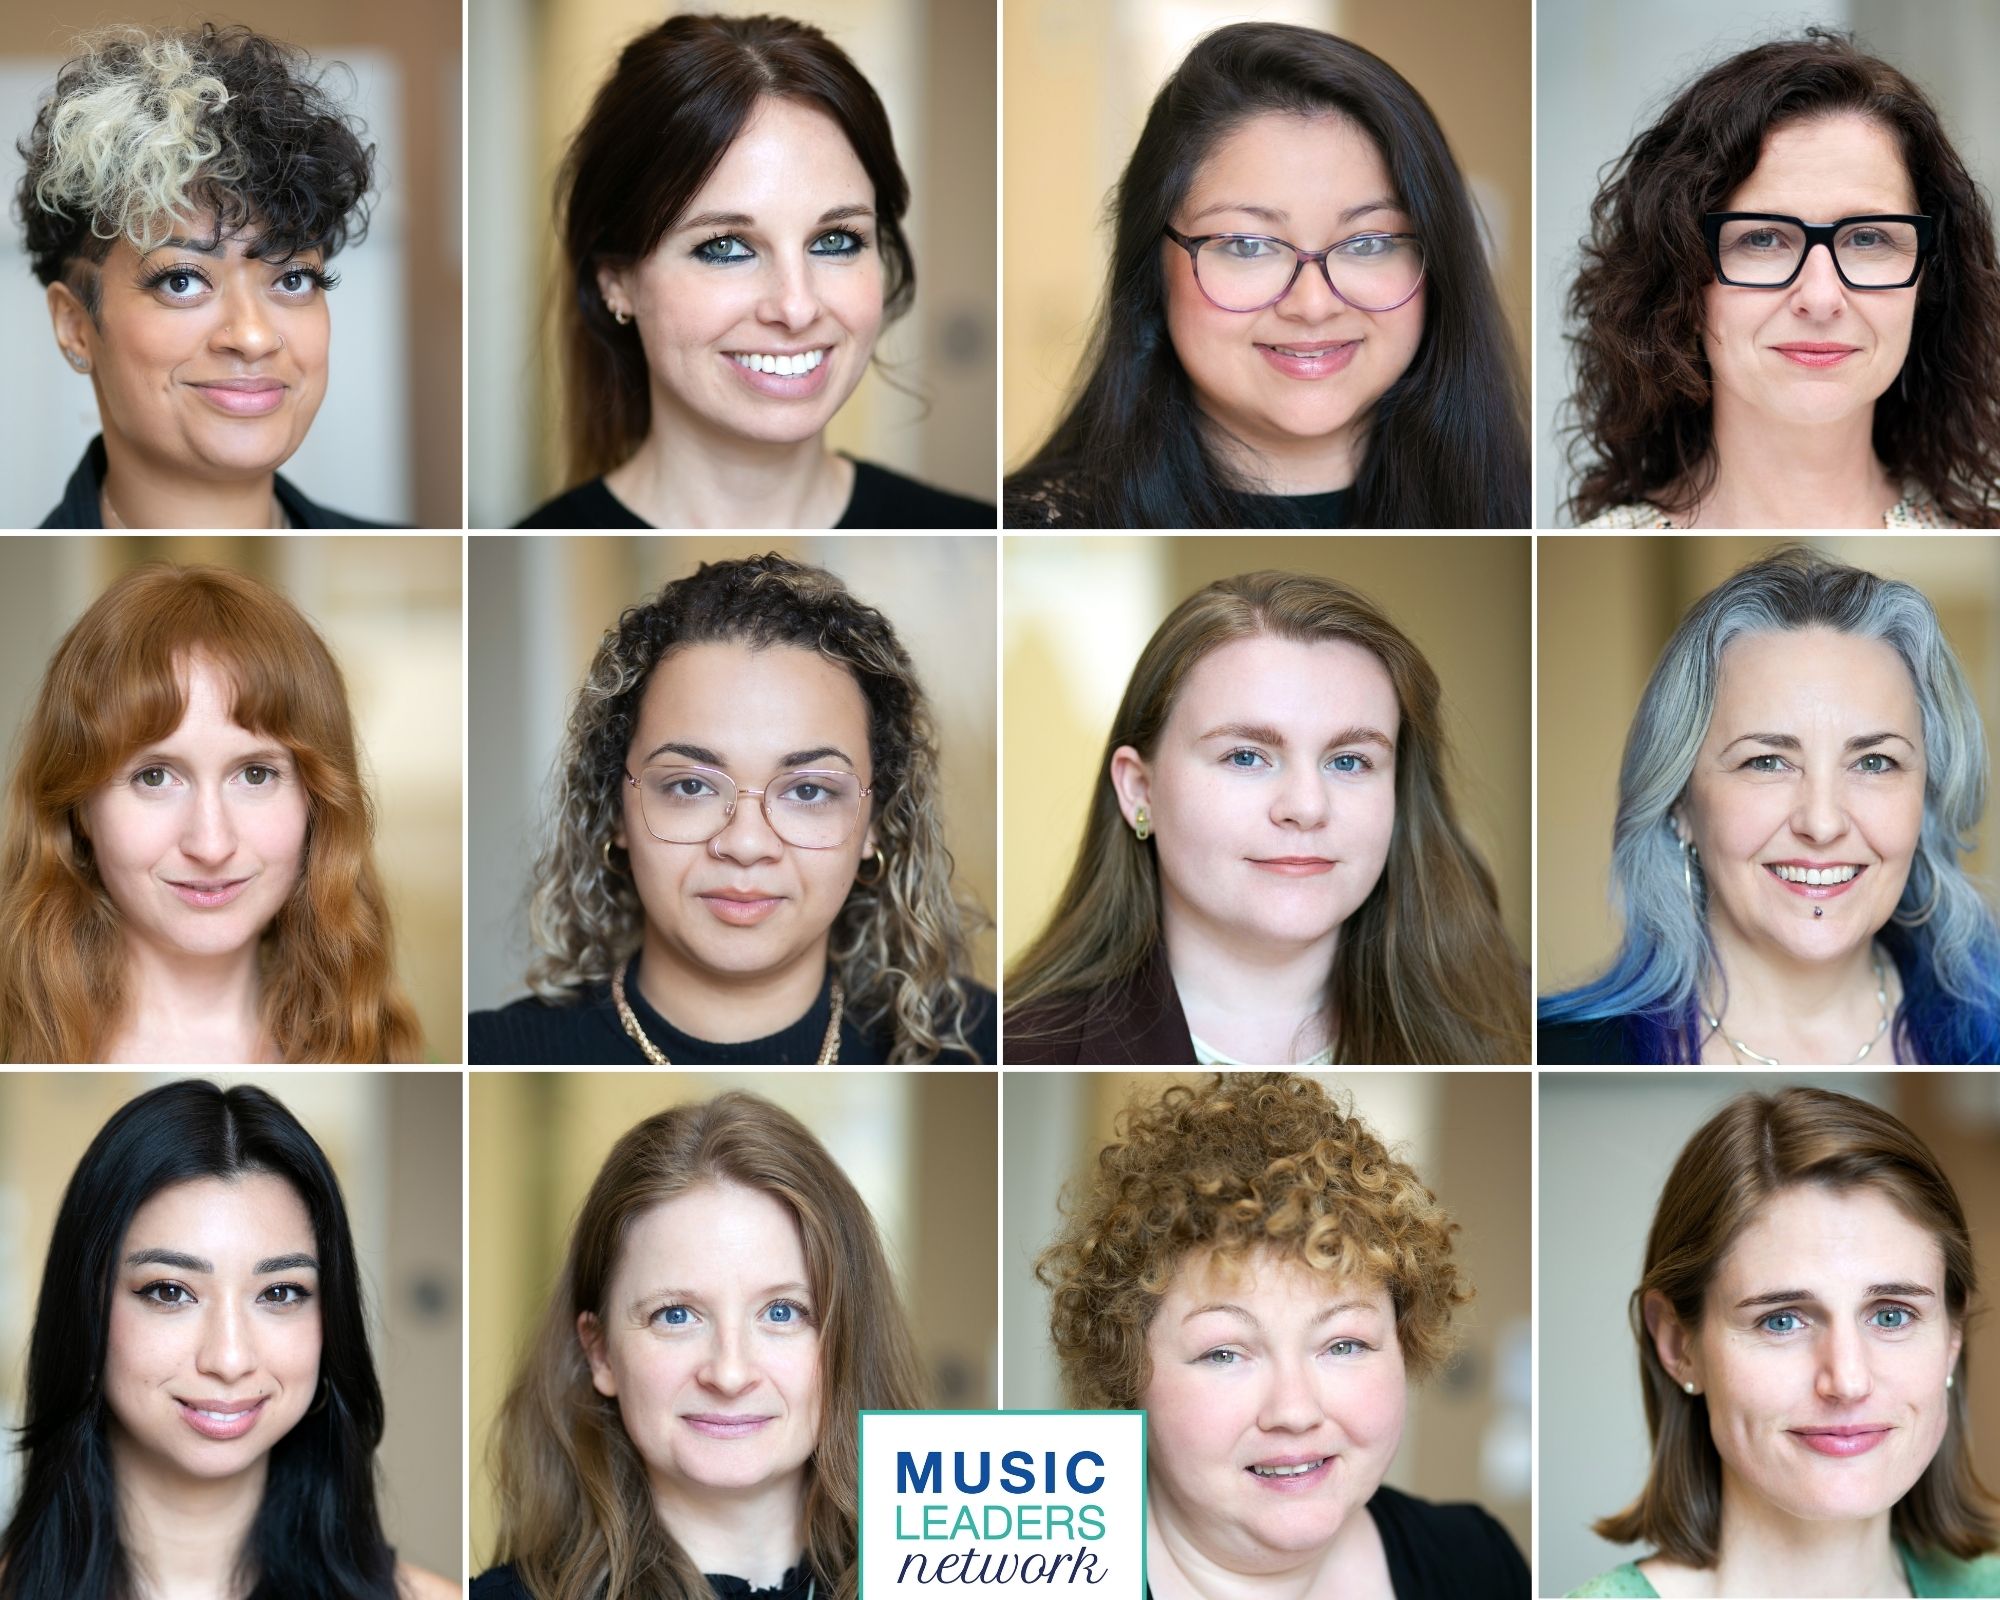 Gallery showing portraits of 12 women arranged in a grid with a music leaders network logo on the image.